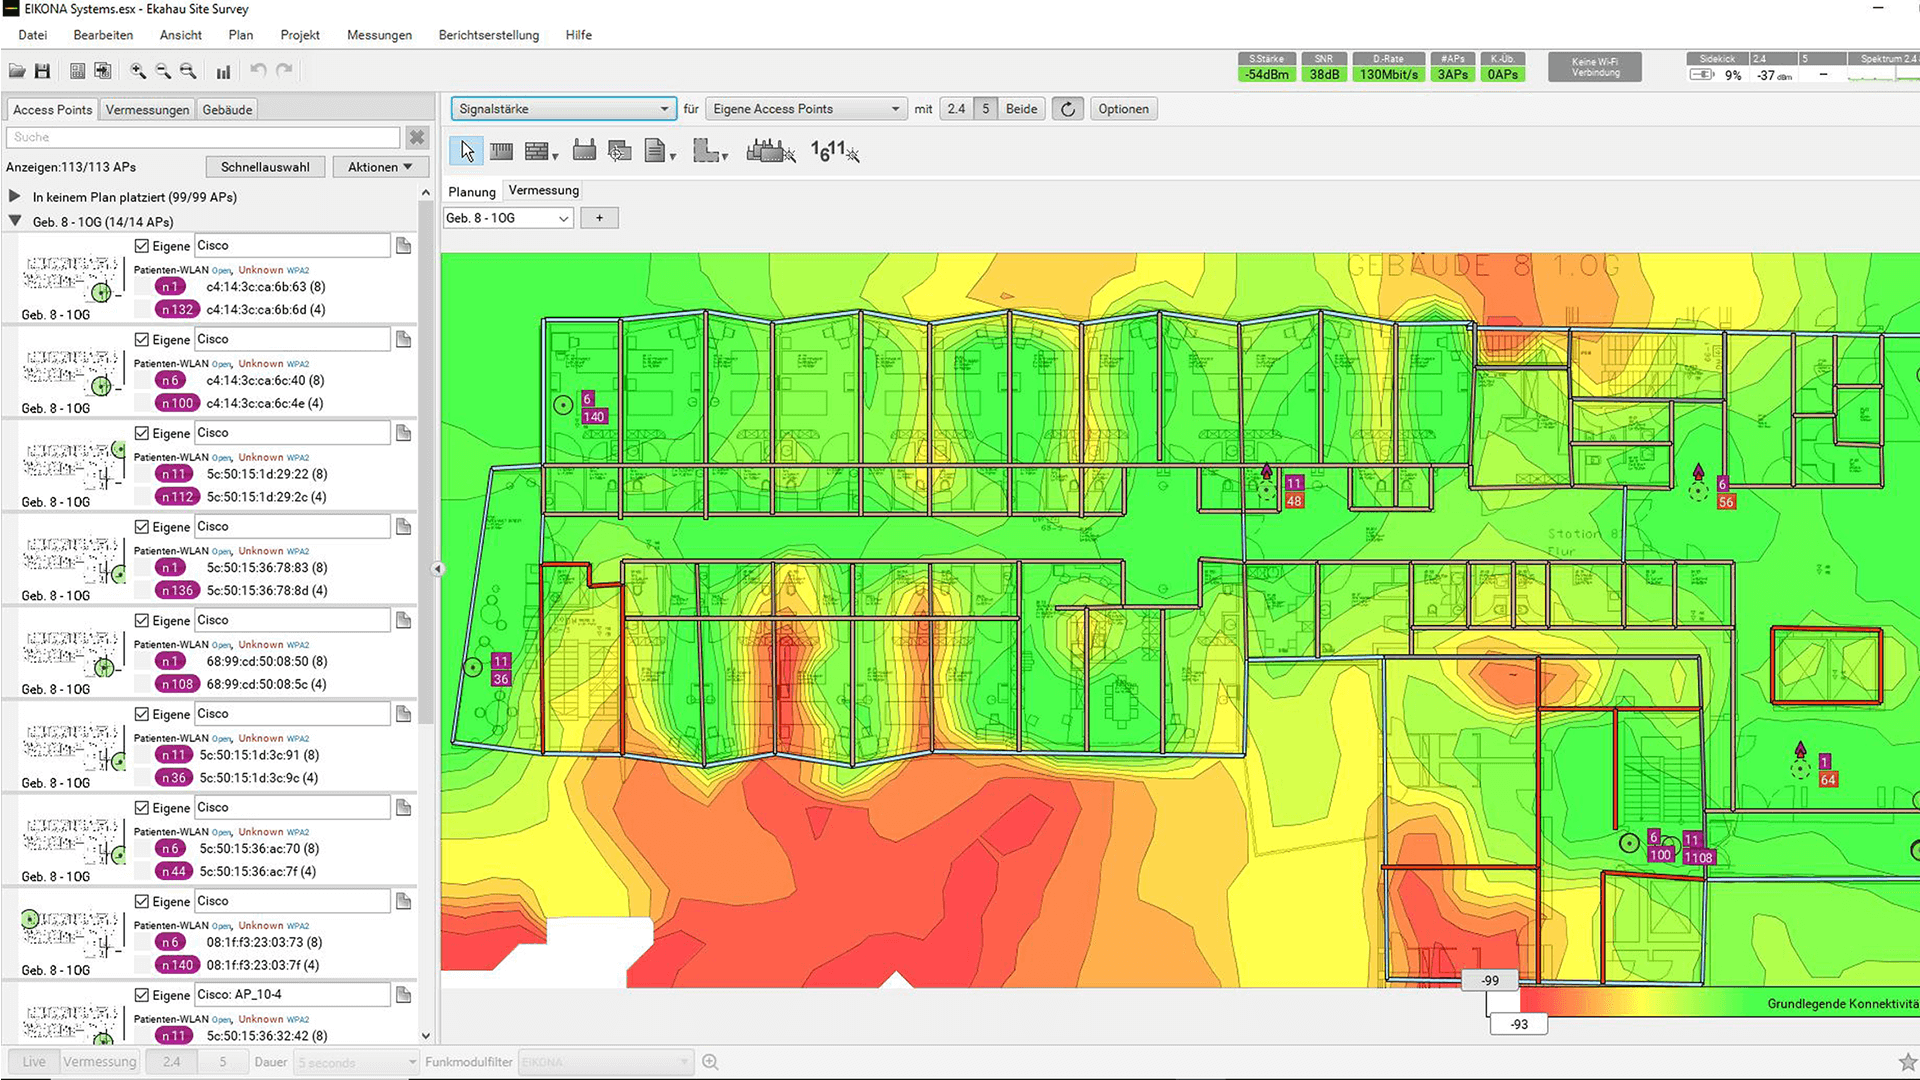 Wi-Fi planning in a heat map